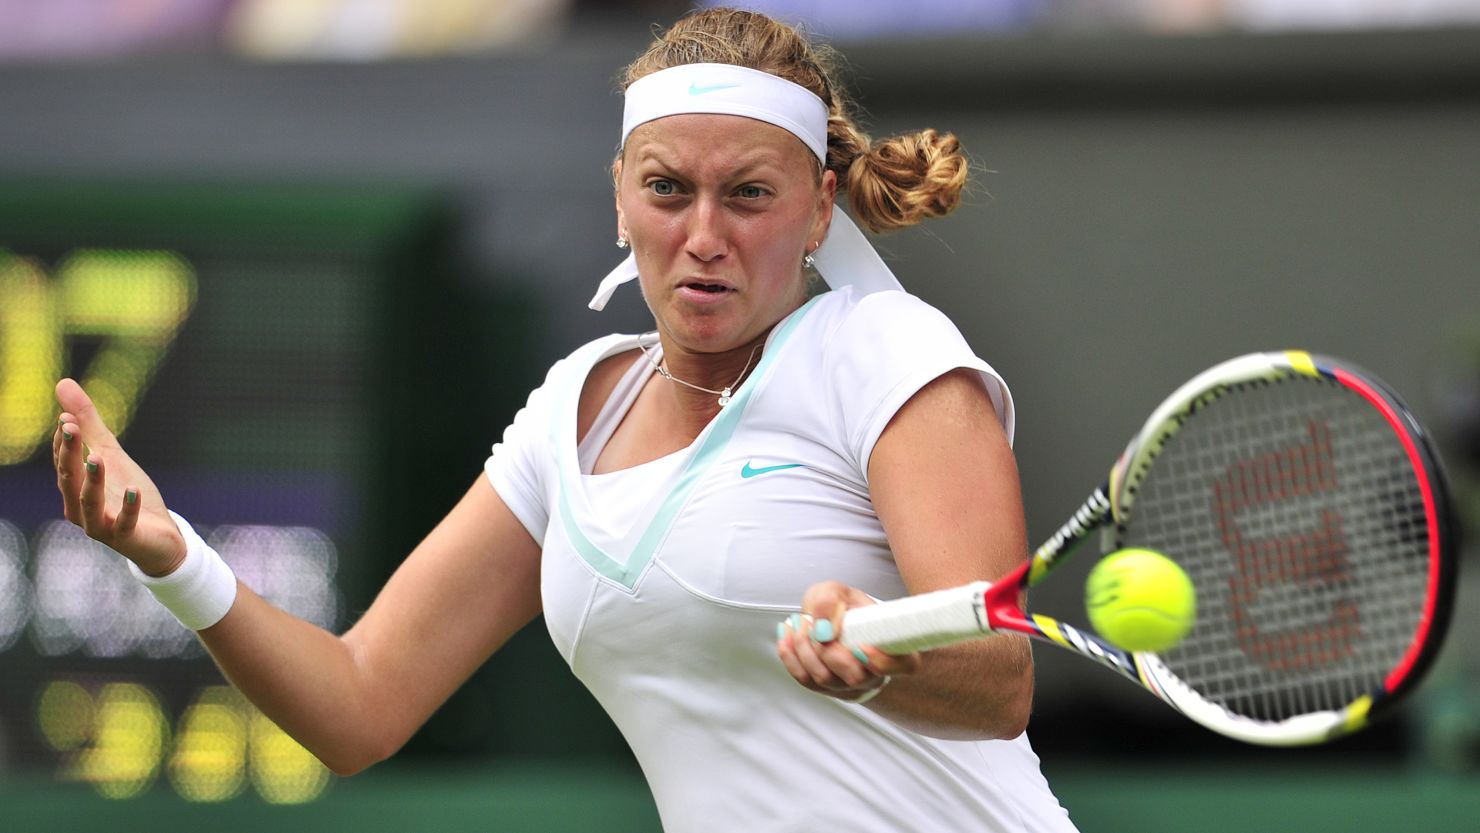 World number four Petra Kvitova's 2011 Wimbledon triumph is her only grand slam win.